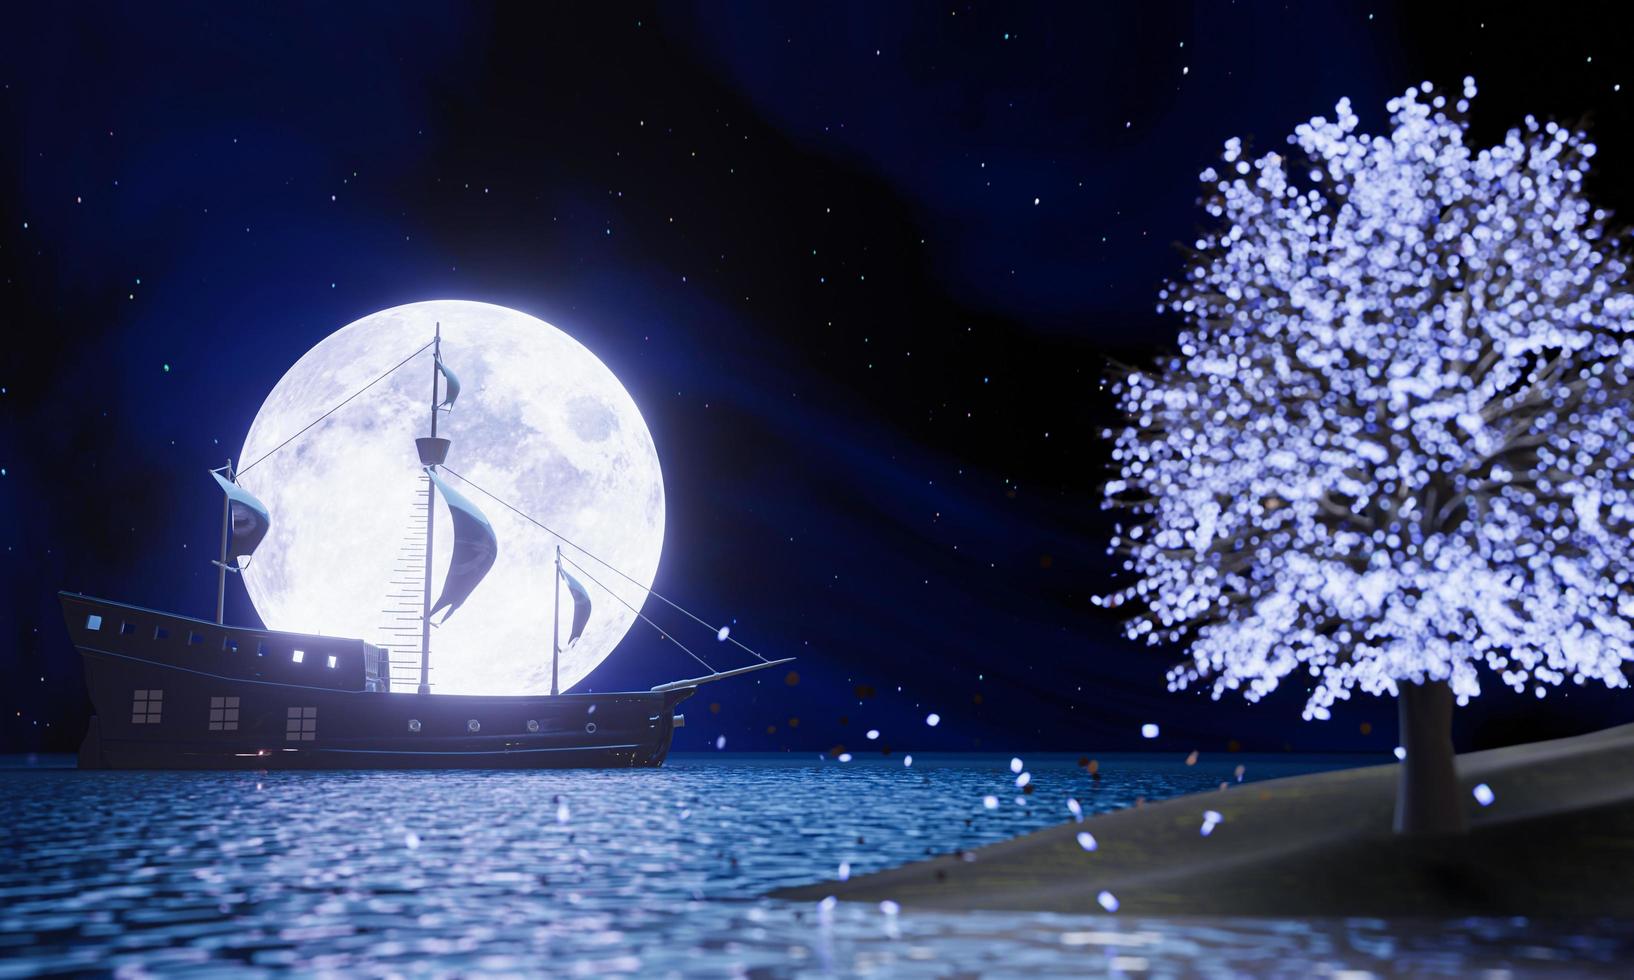 Pirate ships on the sea or ocean in front of the full moon. Pirate ship silhouette past Super Moon with reflection on the water surface. glowing tree On the out-of-focus side is bokeh. 3D rendering photo